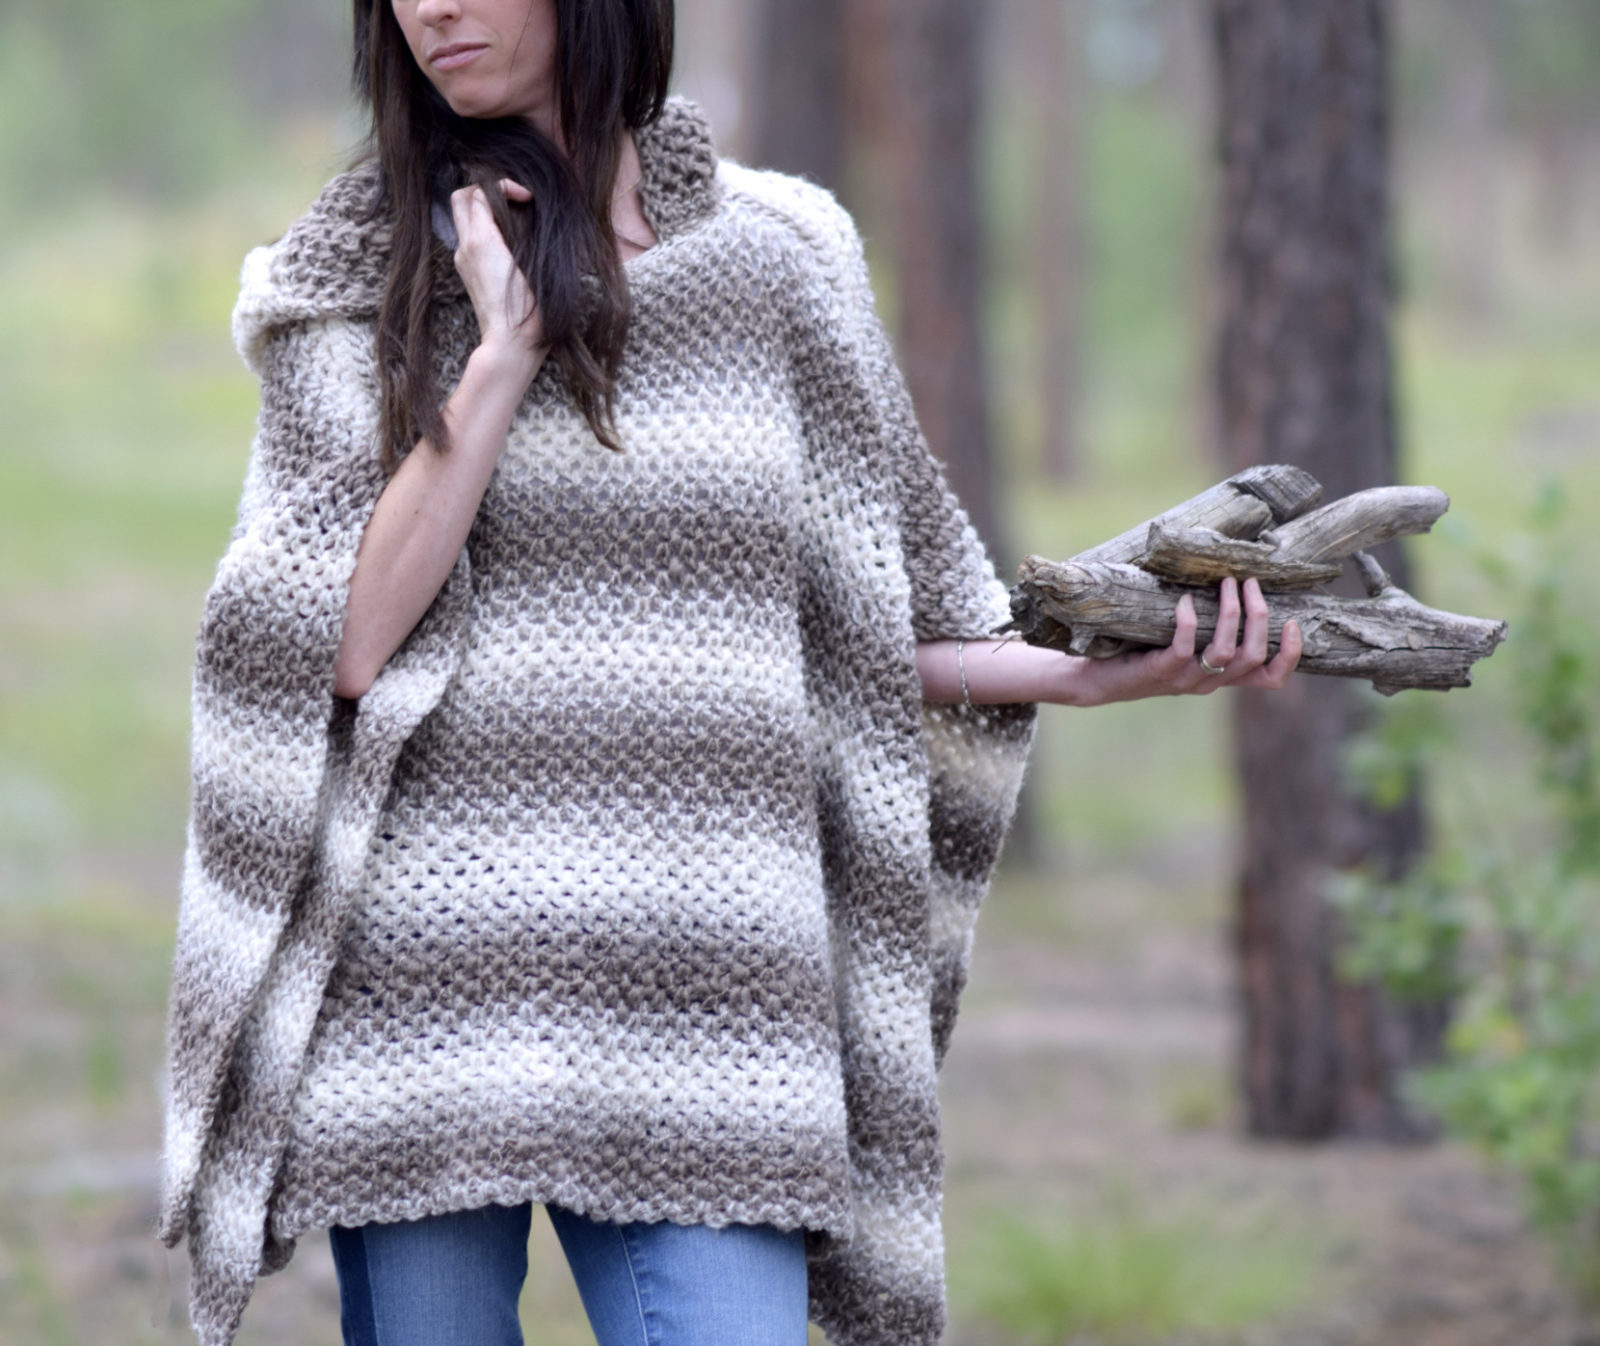 Free Knitting Patterns For Ponchos Or Capes Free Knitting Patterns For Ponchos For Teen